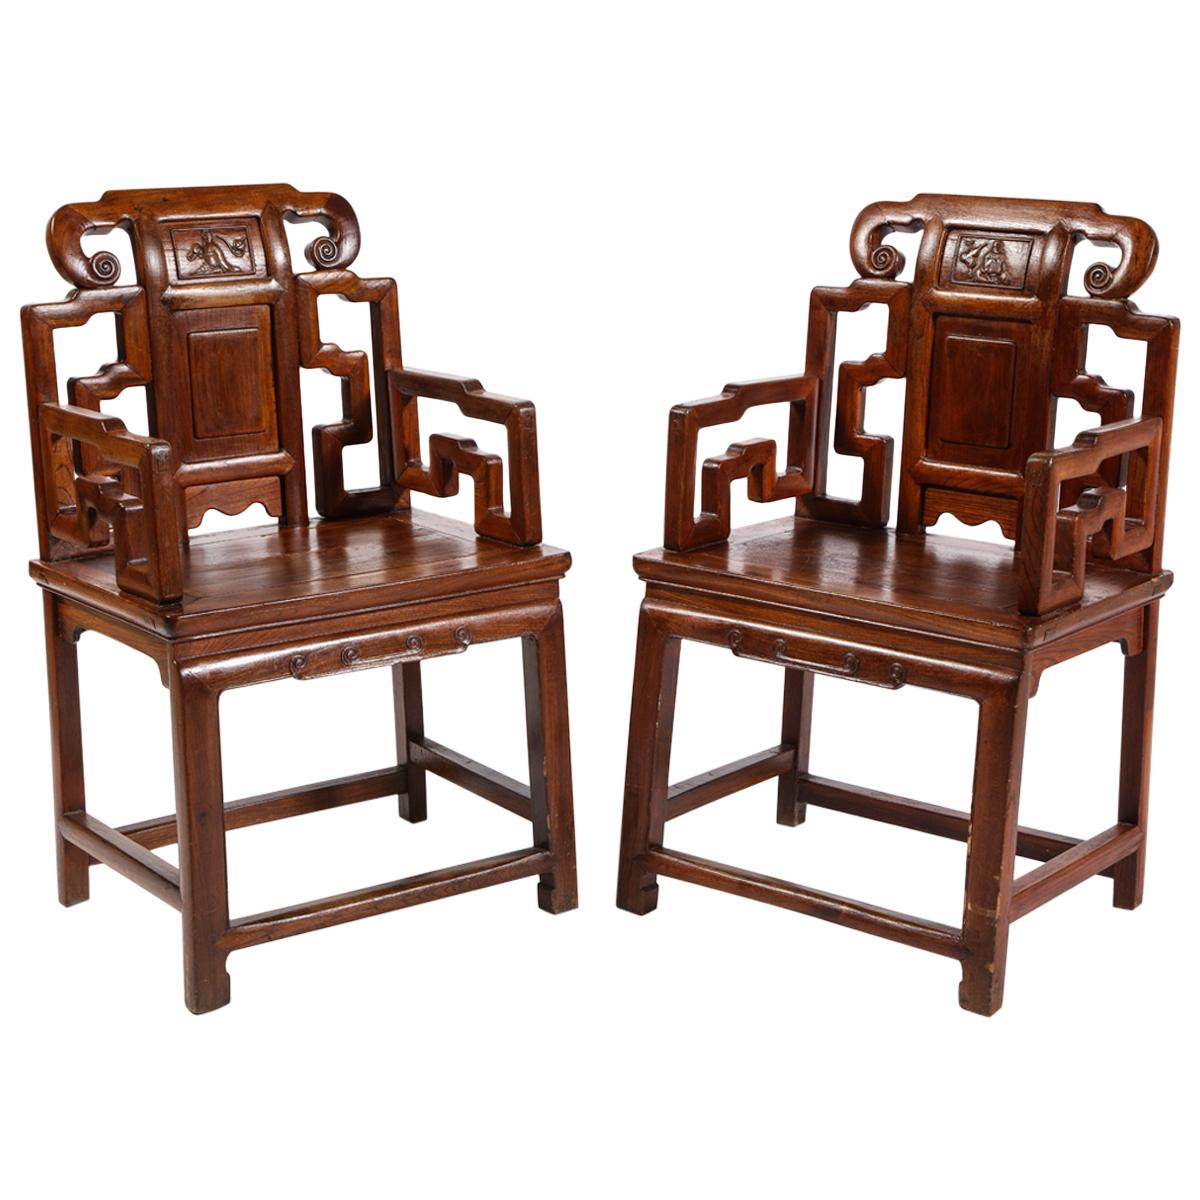 Pair of Chinese Hardwood Chairs with Fretwork Designs and High Relief Panels For Sale